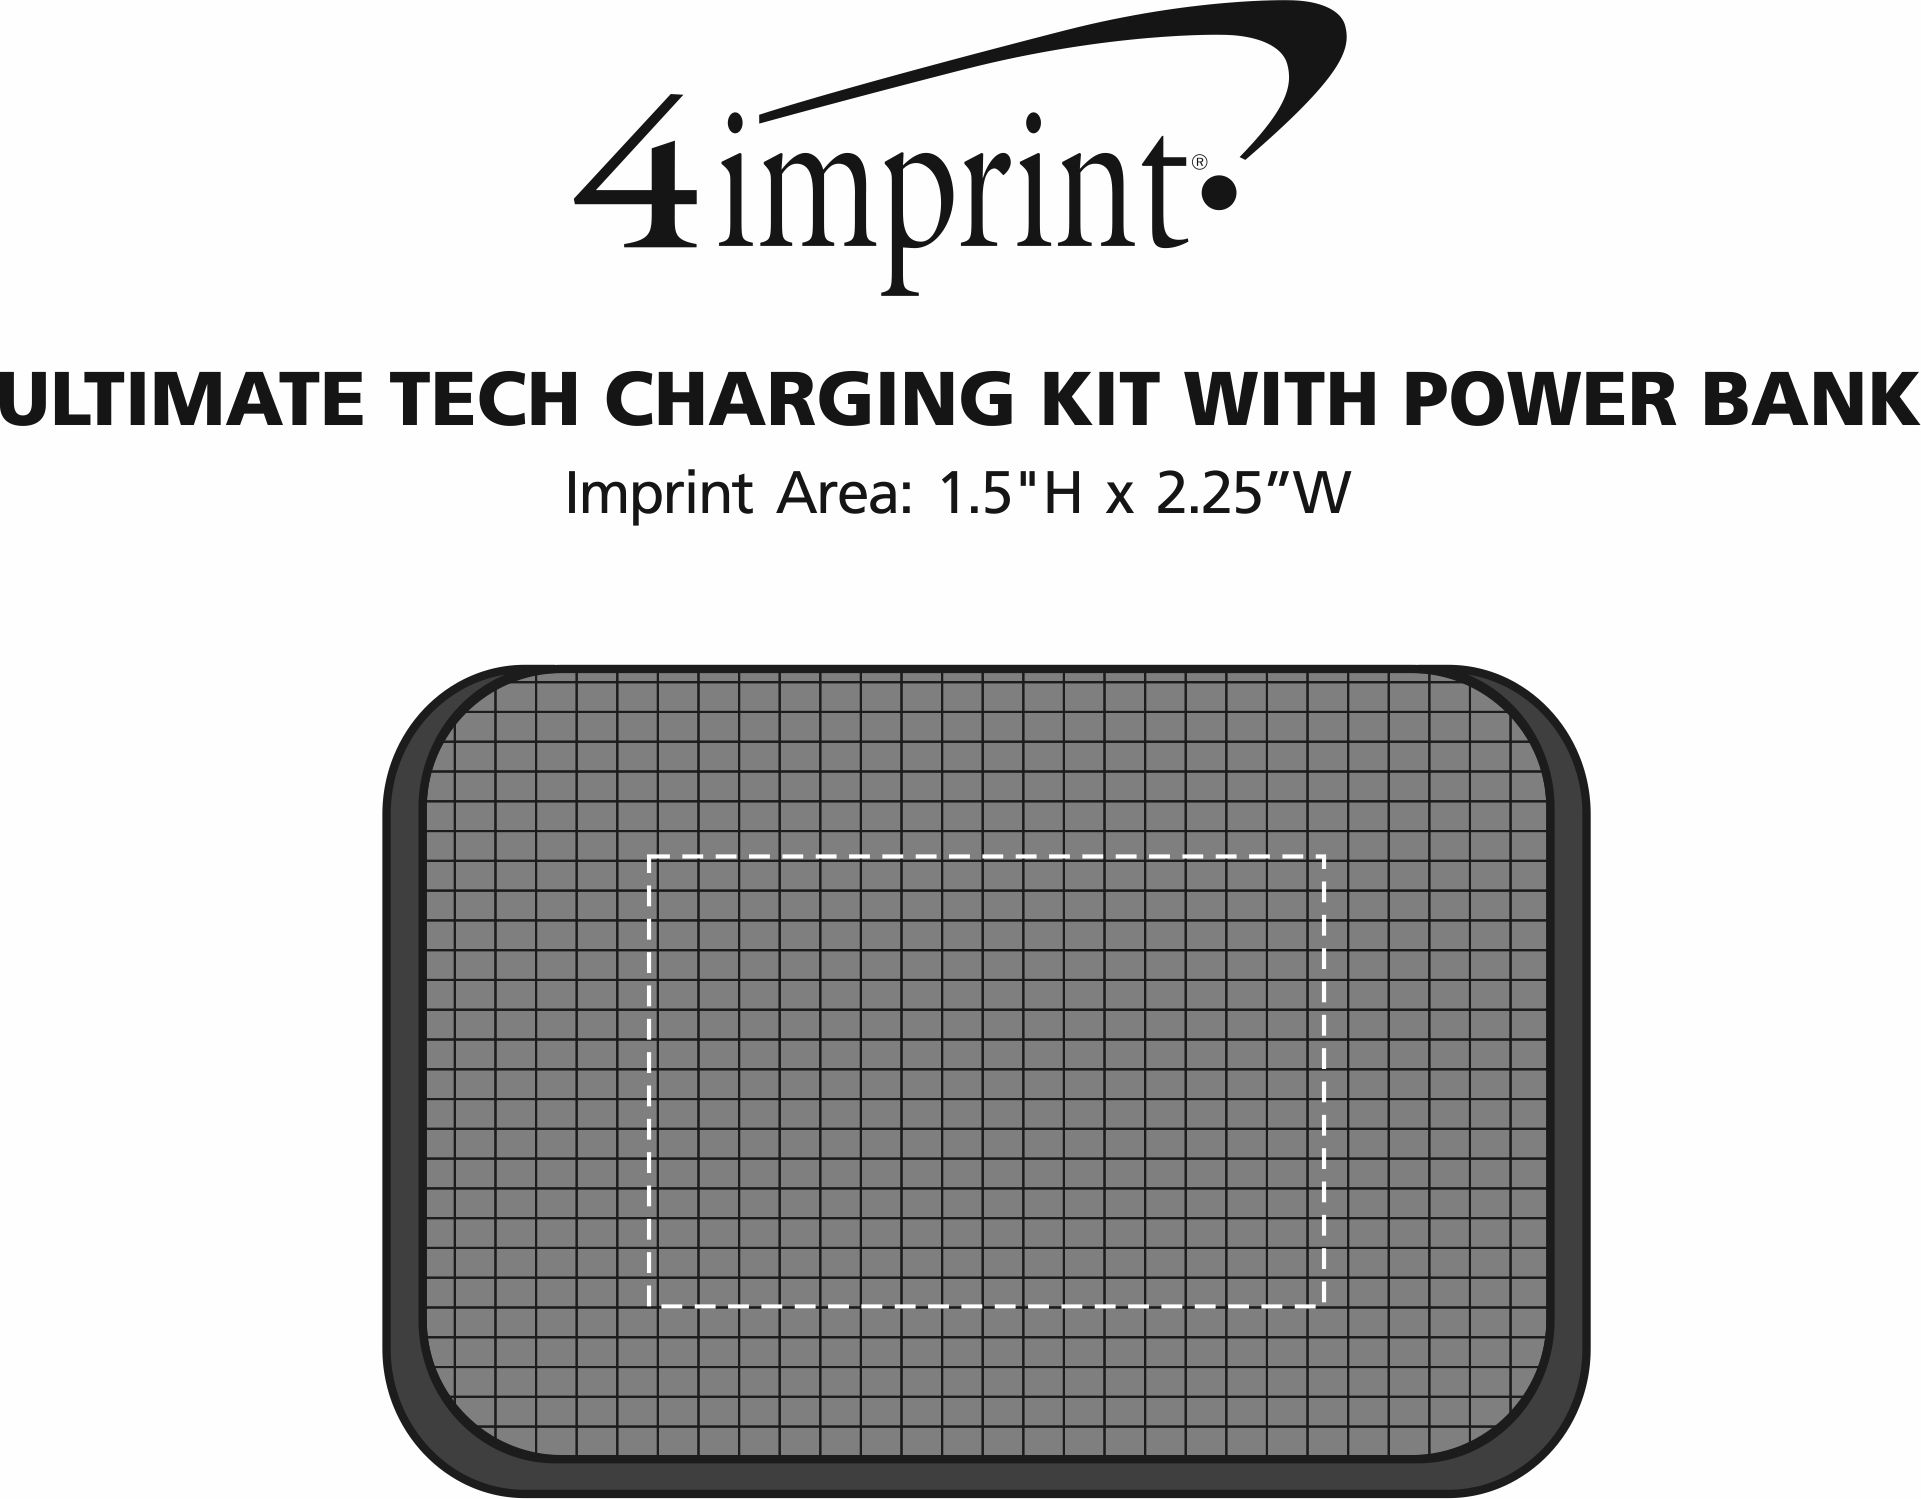 Imprint Area of Ultimate Tech Charging Kit with Power Bank